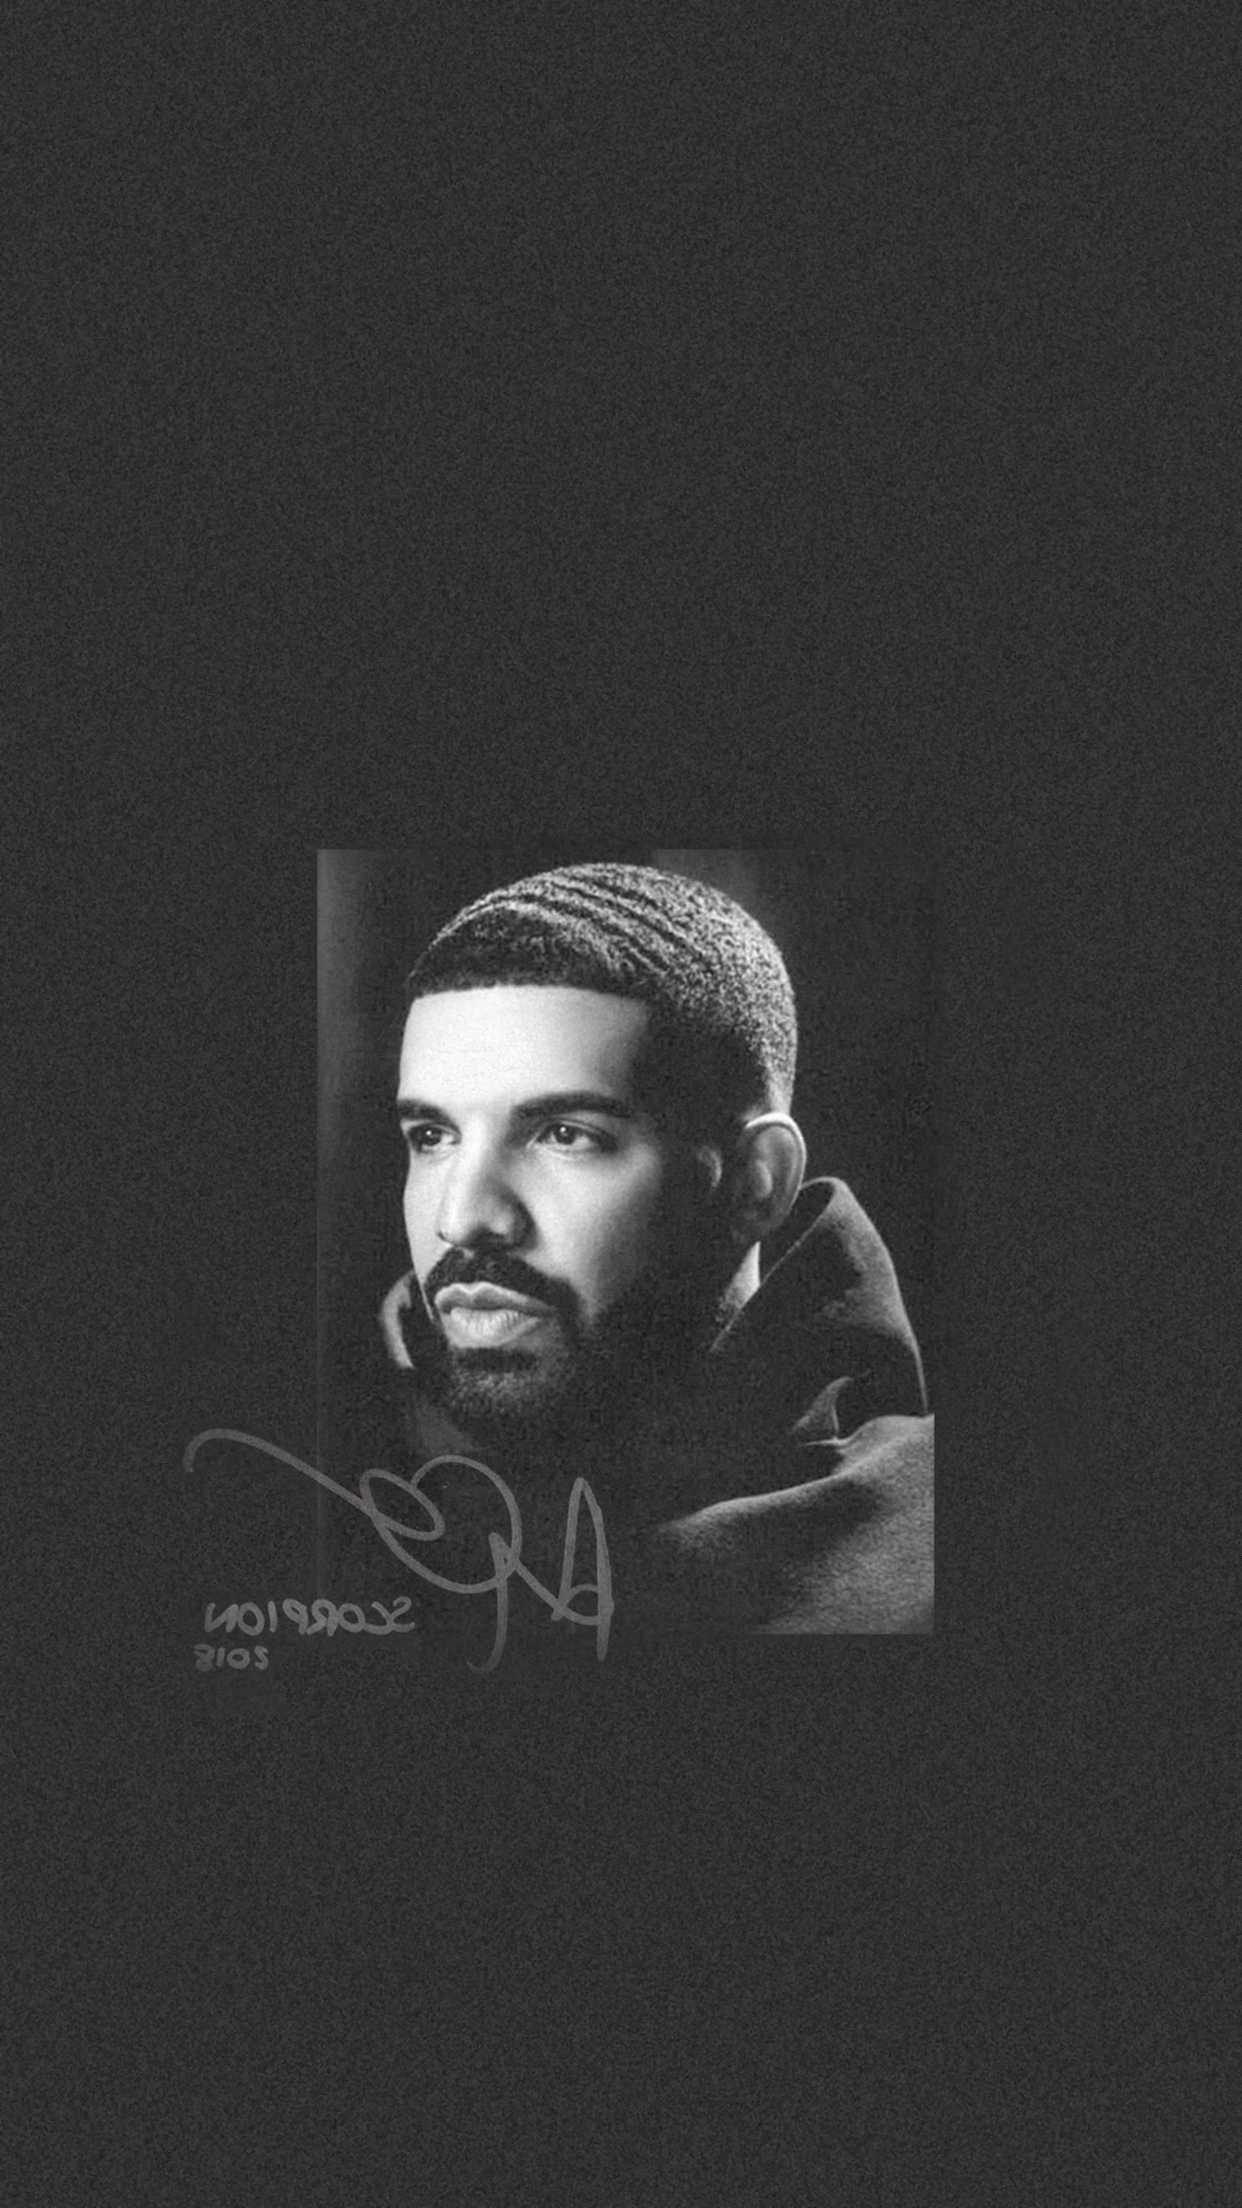 Drake iPhone Wallpaper with high-resolution 1080x1920 pixel. You can use this wallpaper for your iPhone 5, 6, 7, 8, X, XS, XR backgrounds, Mobile Screensaver, or iPad Lock Screen - Drake